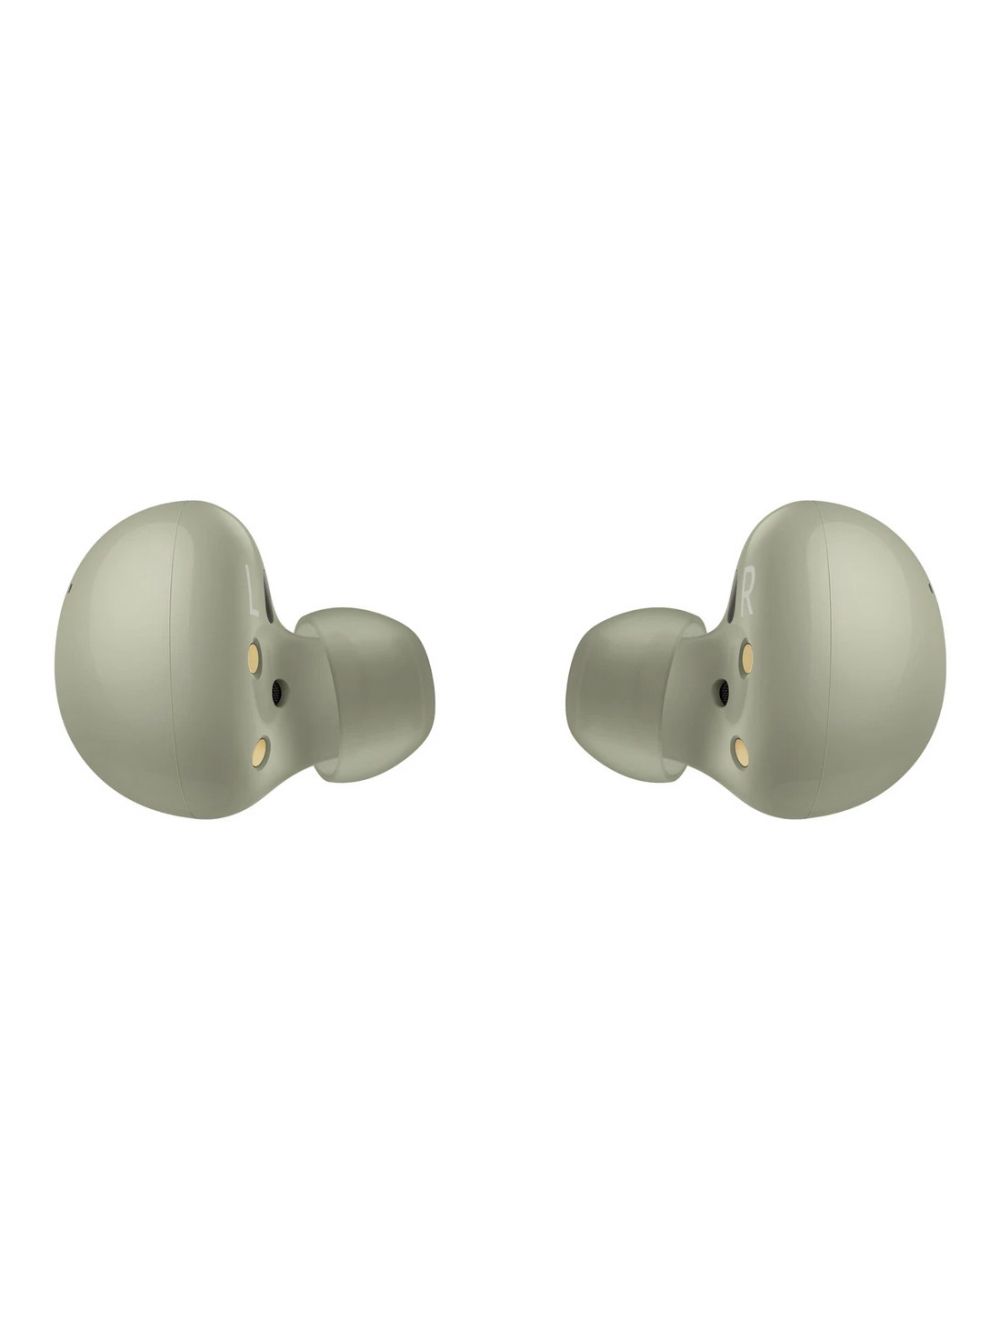 Samsung Galaxy Buds2 Wireless Active Noise Cancelling Earbuds - Olive